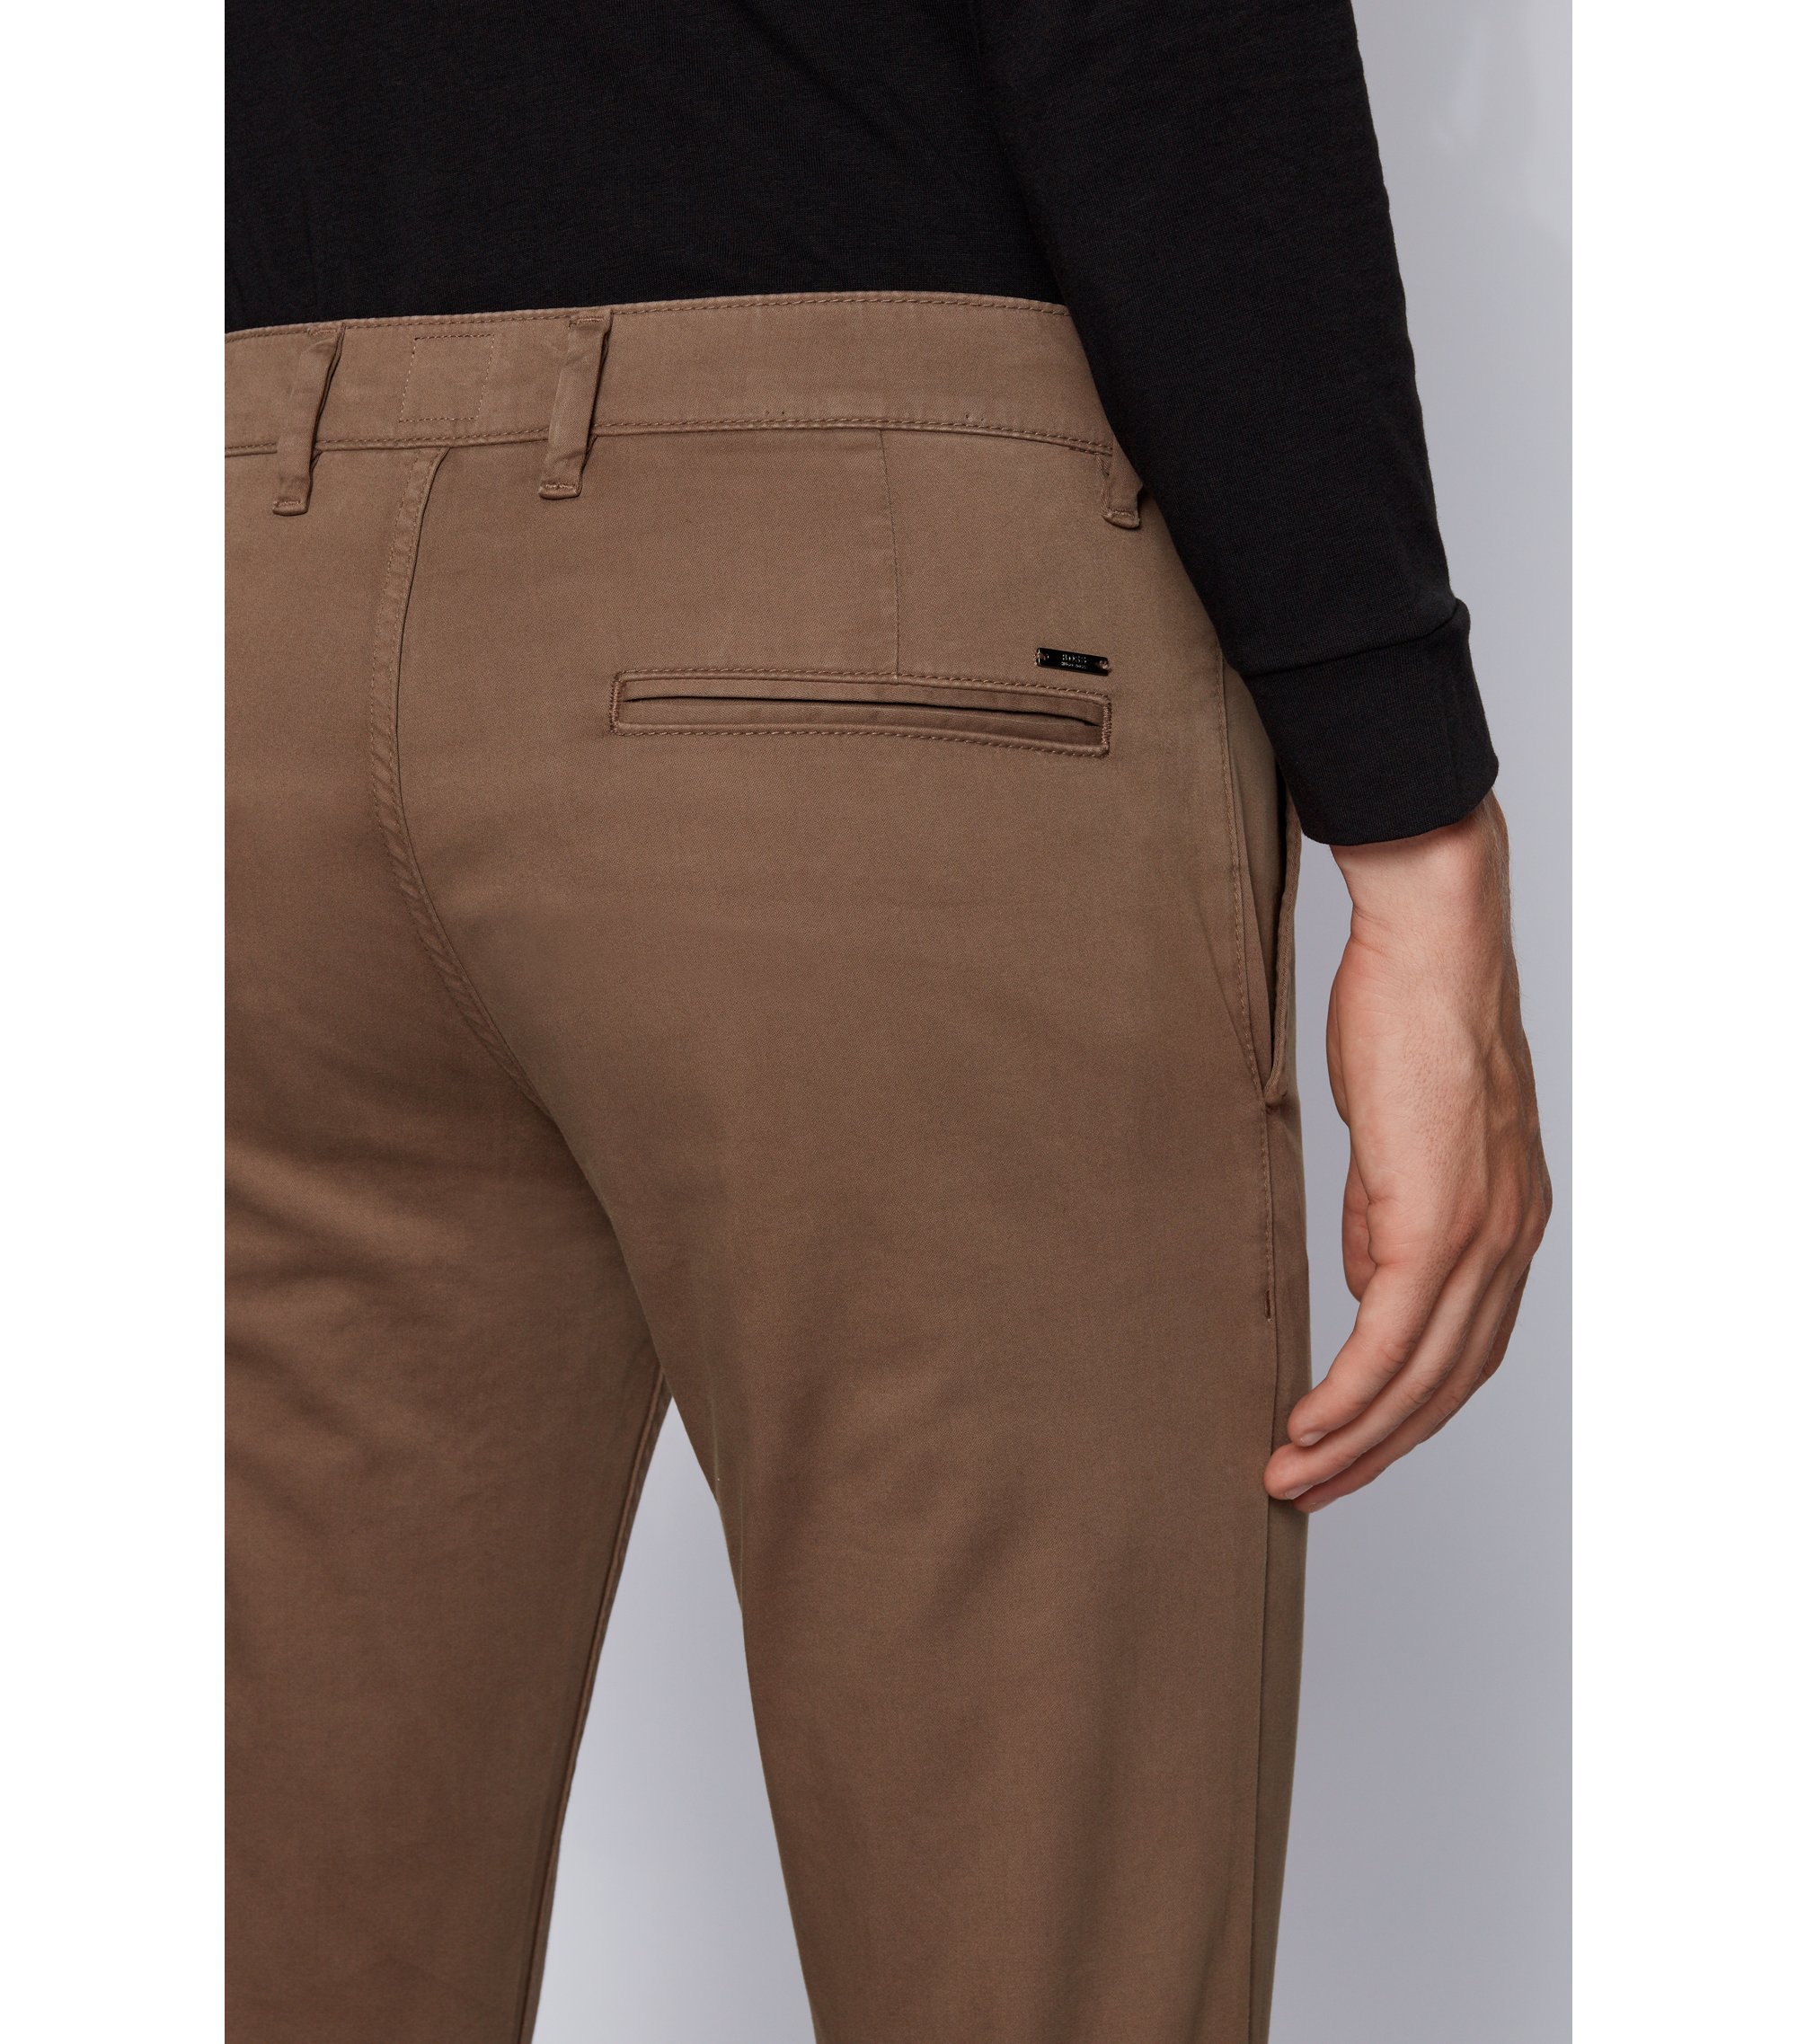 Hugo Boss Slim-fit casual chinos in brushed stretch cotton  Beige  RRP £89